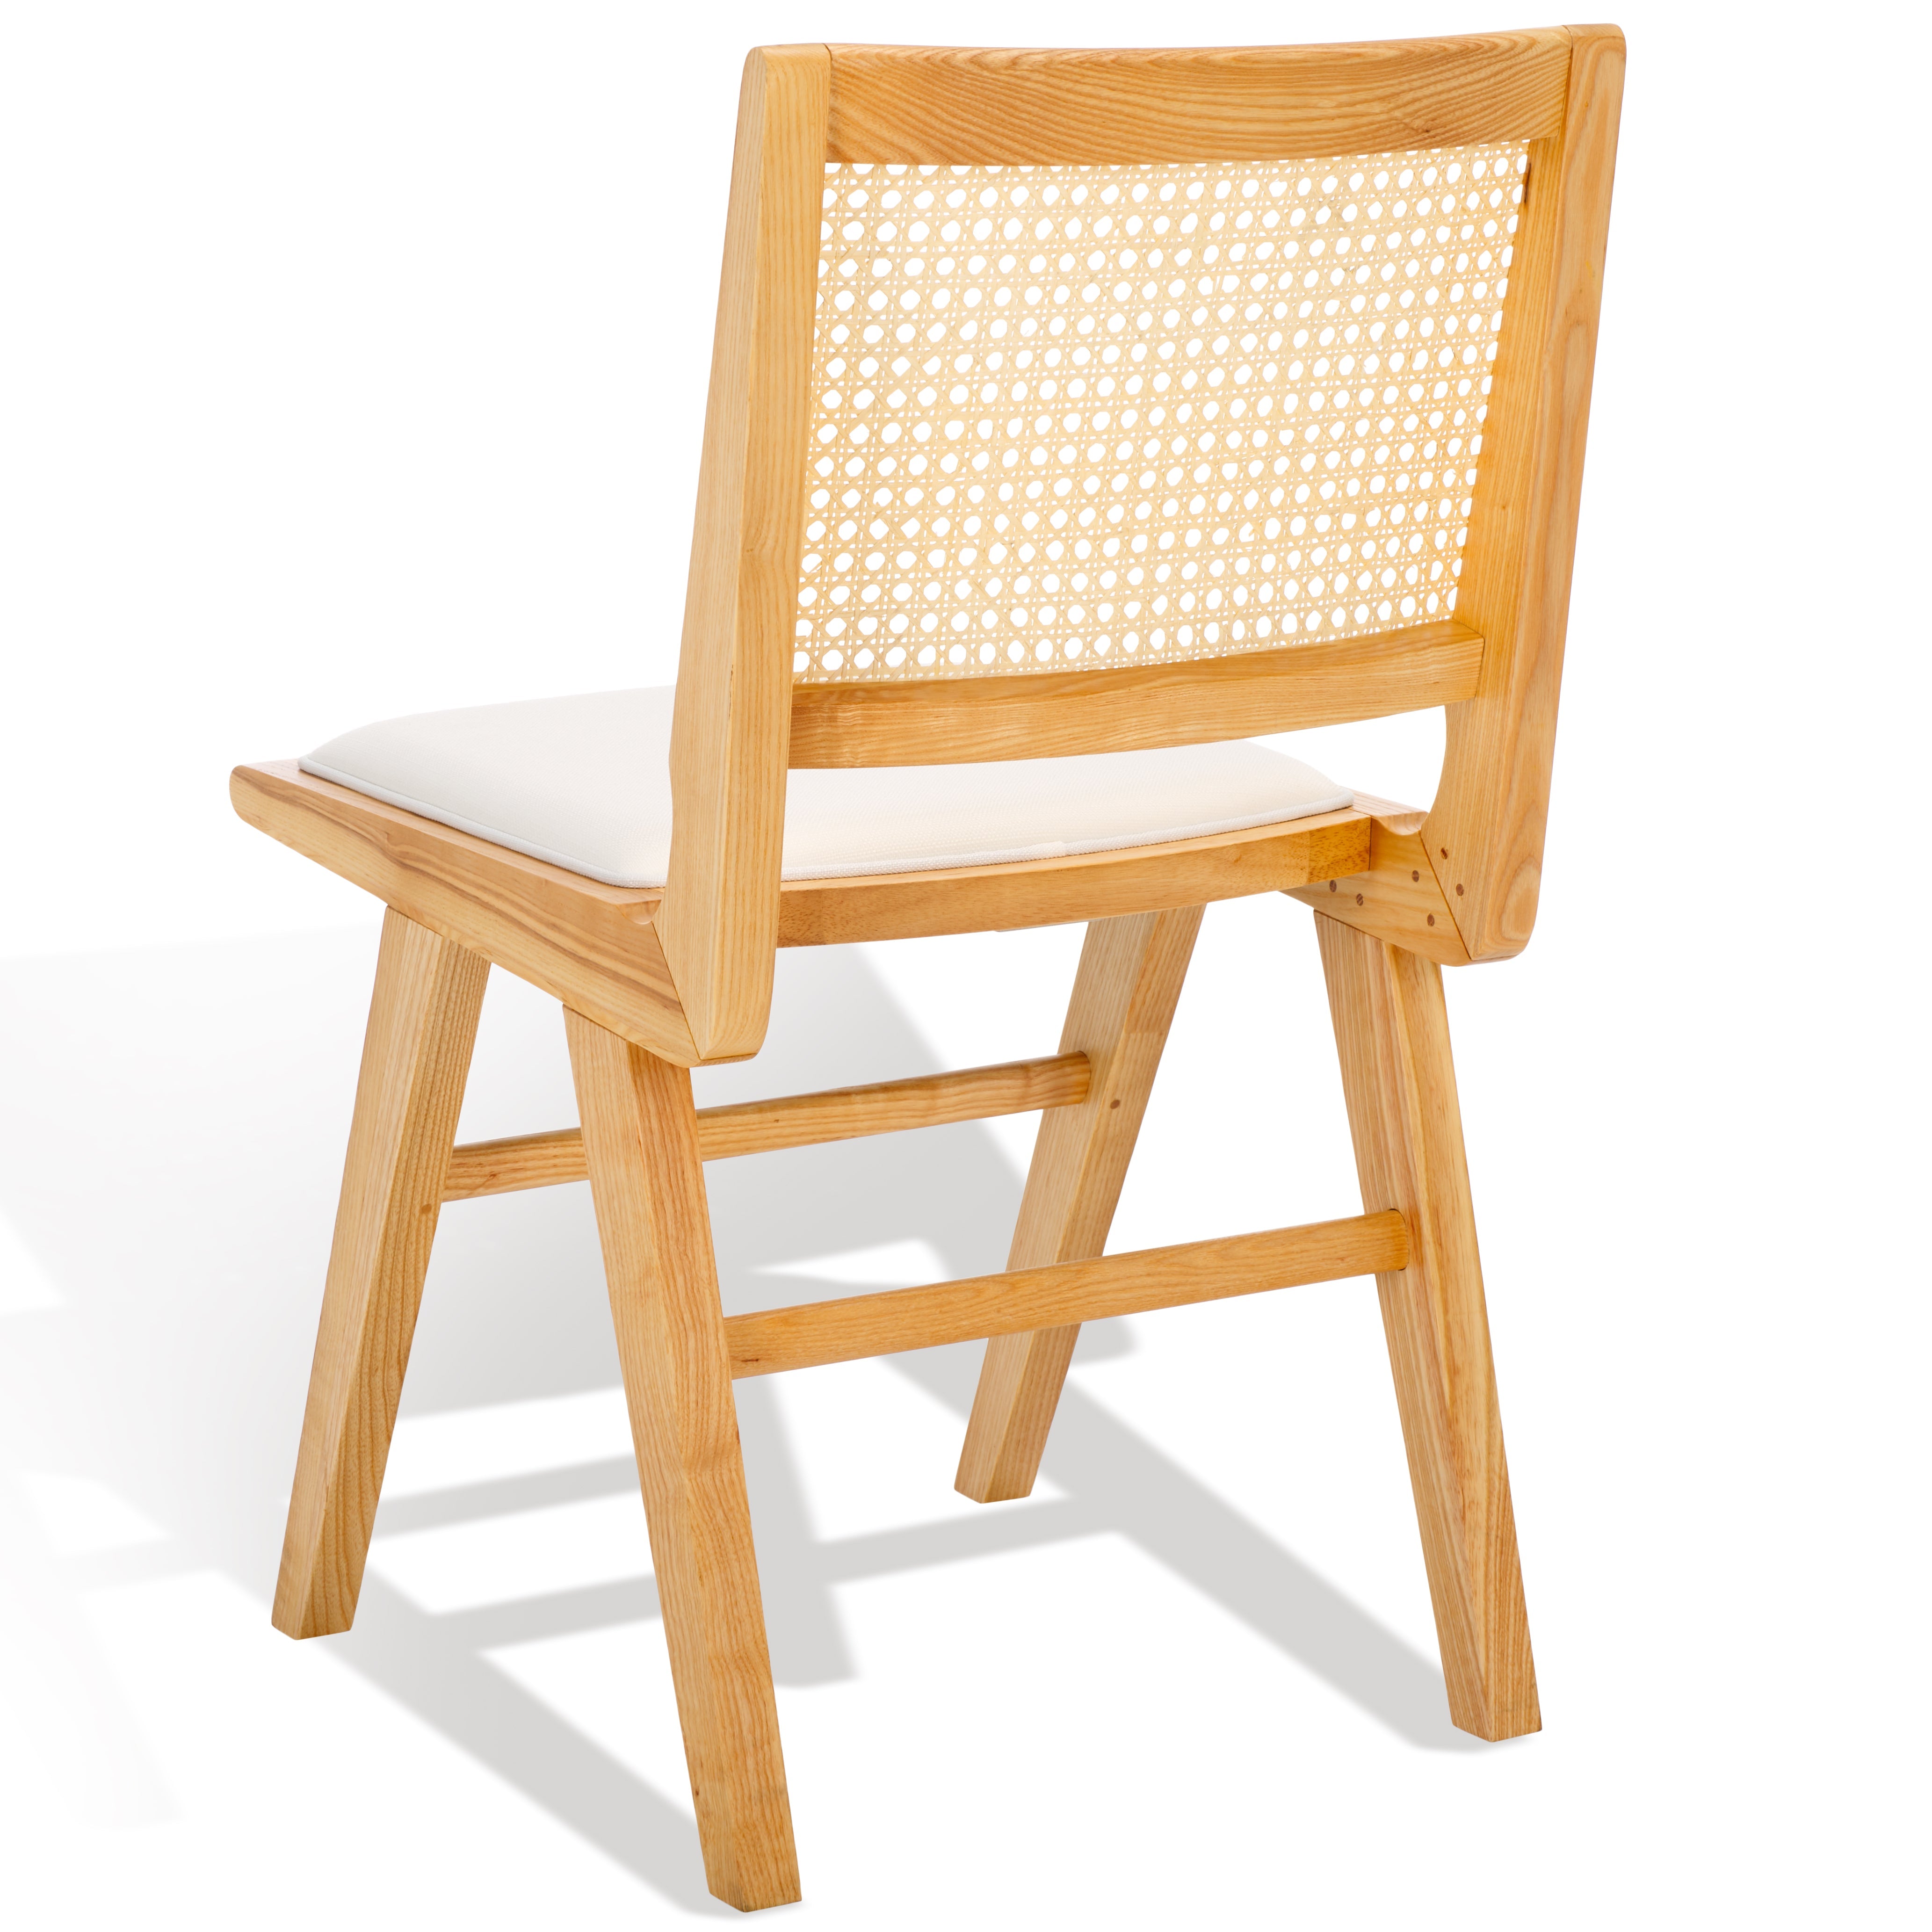 safavieh couture hattie french cane cushion seat dining chair, sfv4154 - Natural